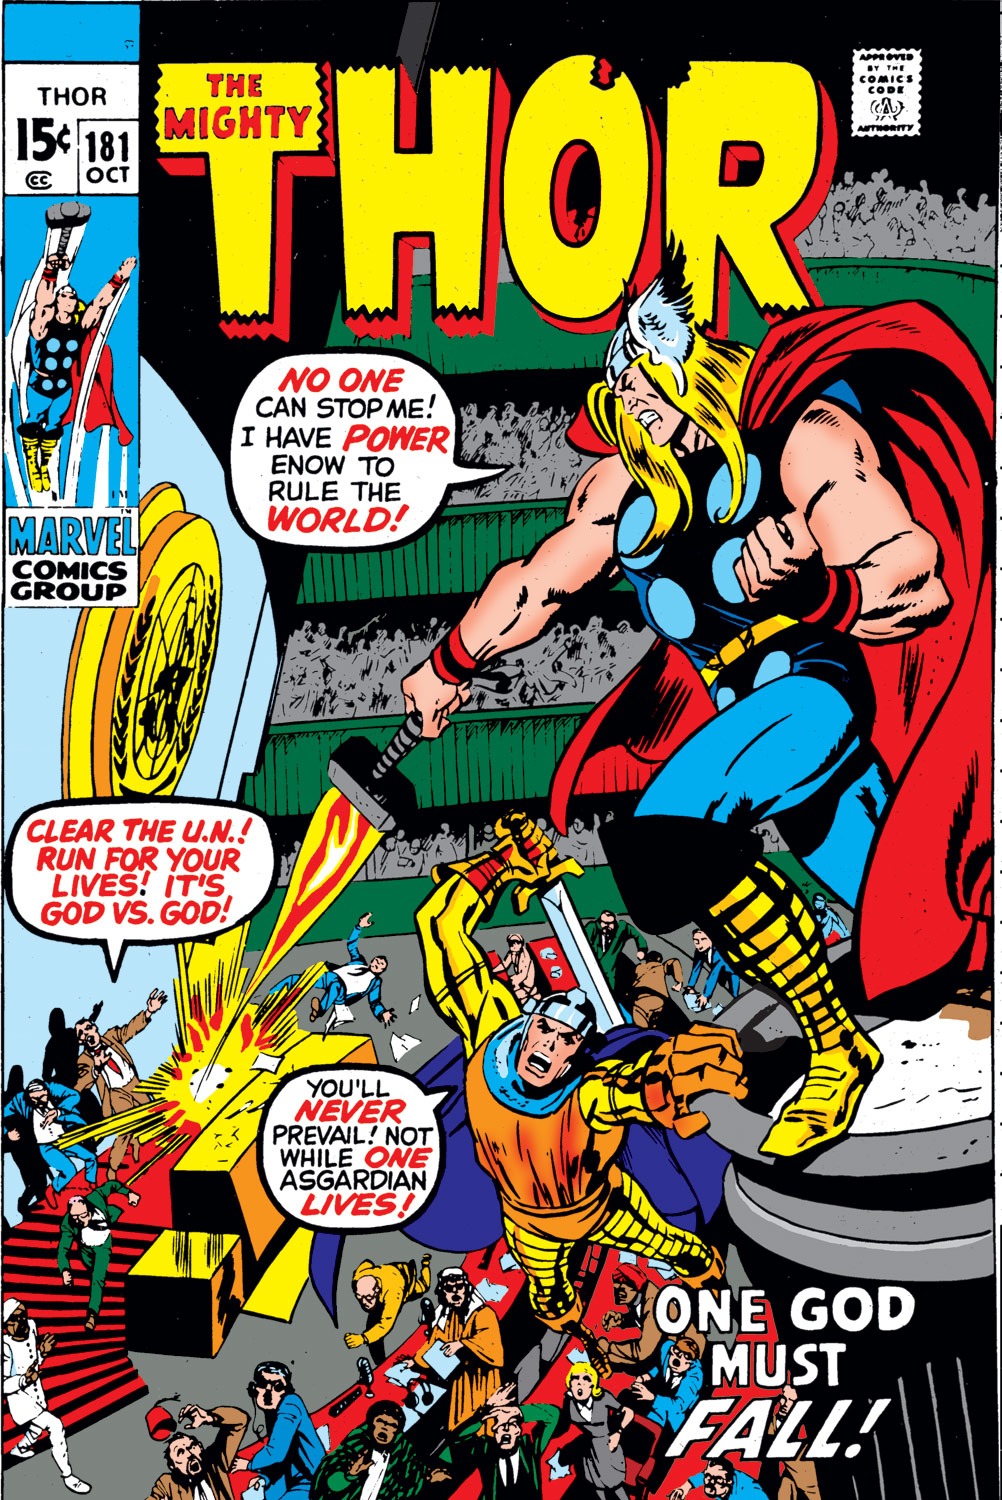 Thor (1966) 181 Page 0